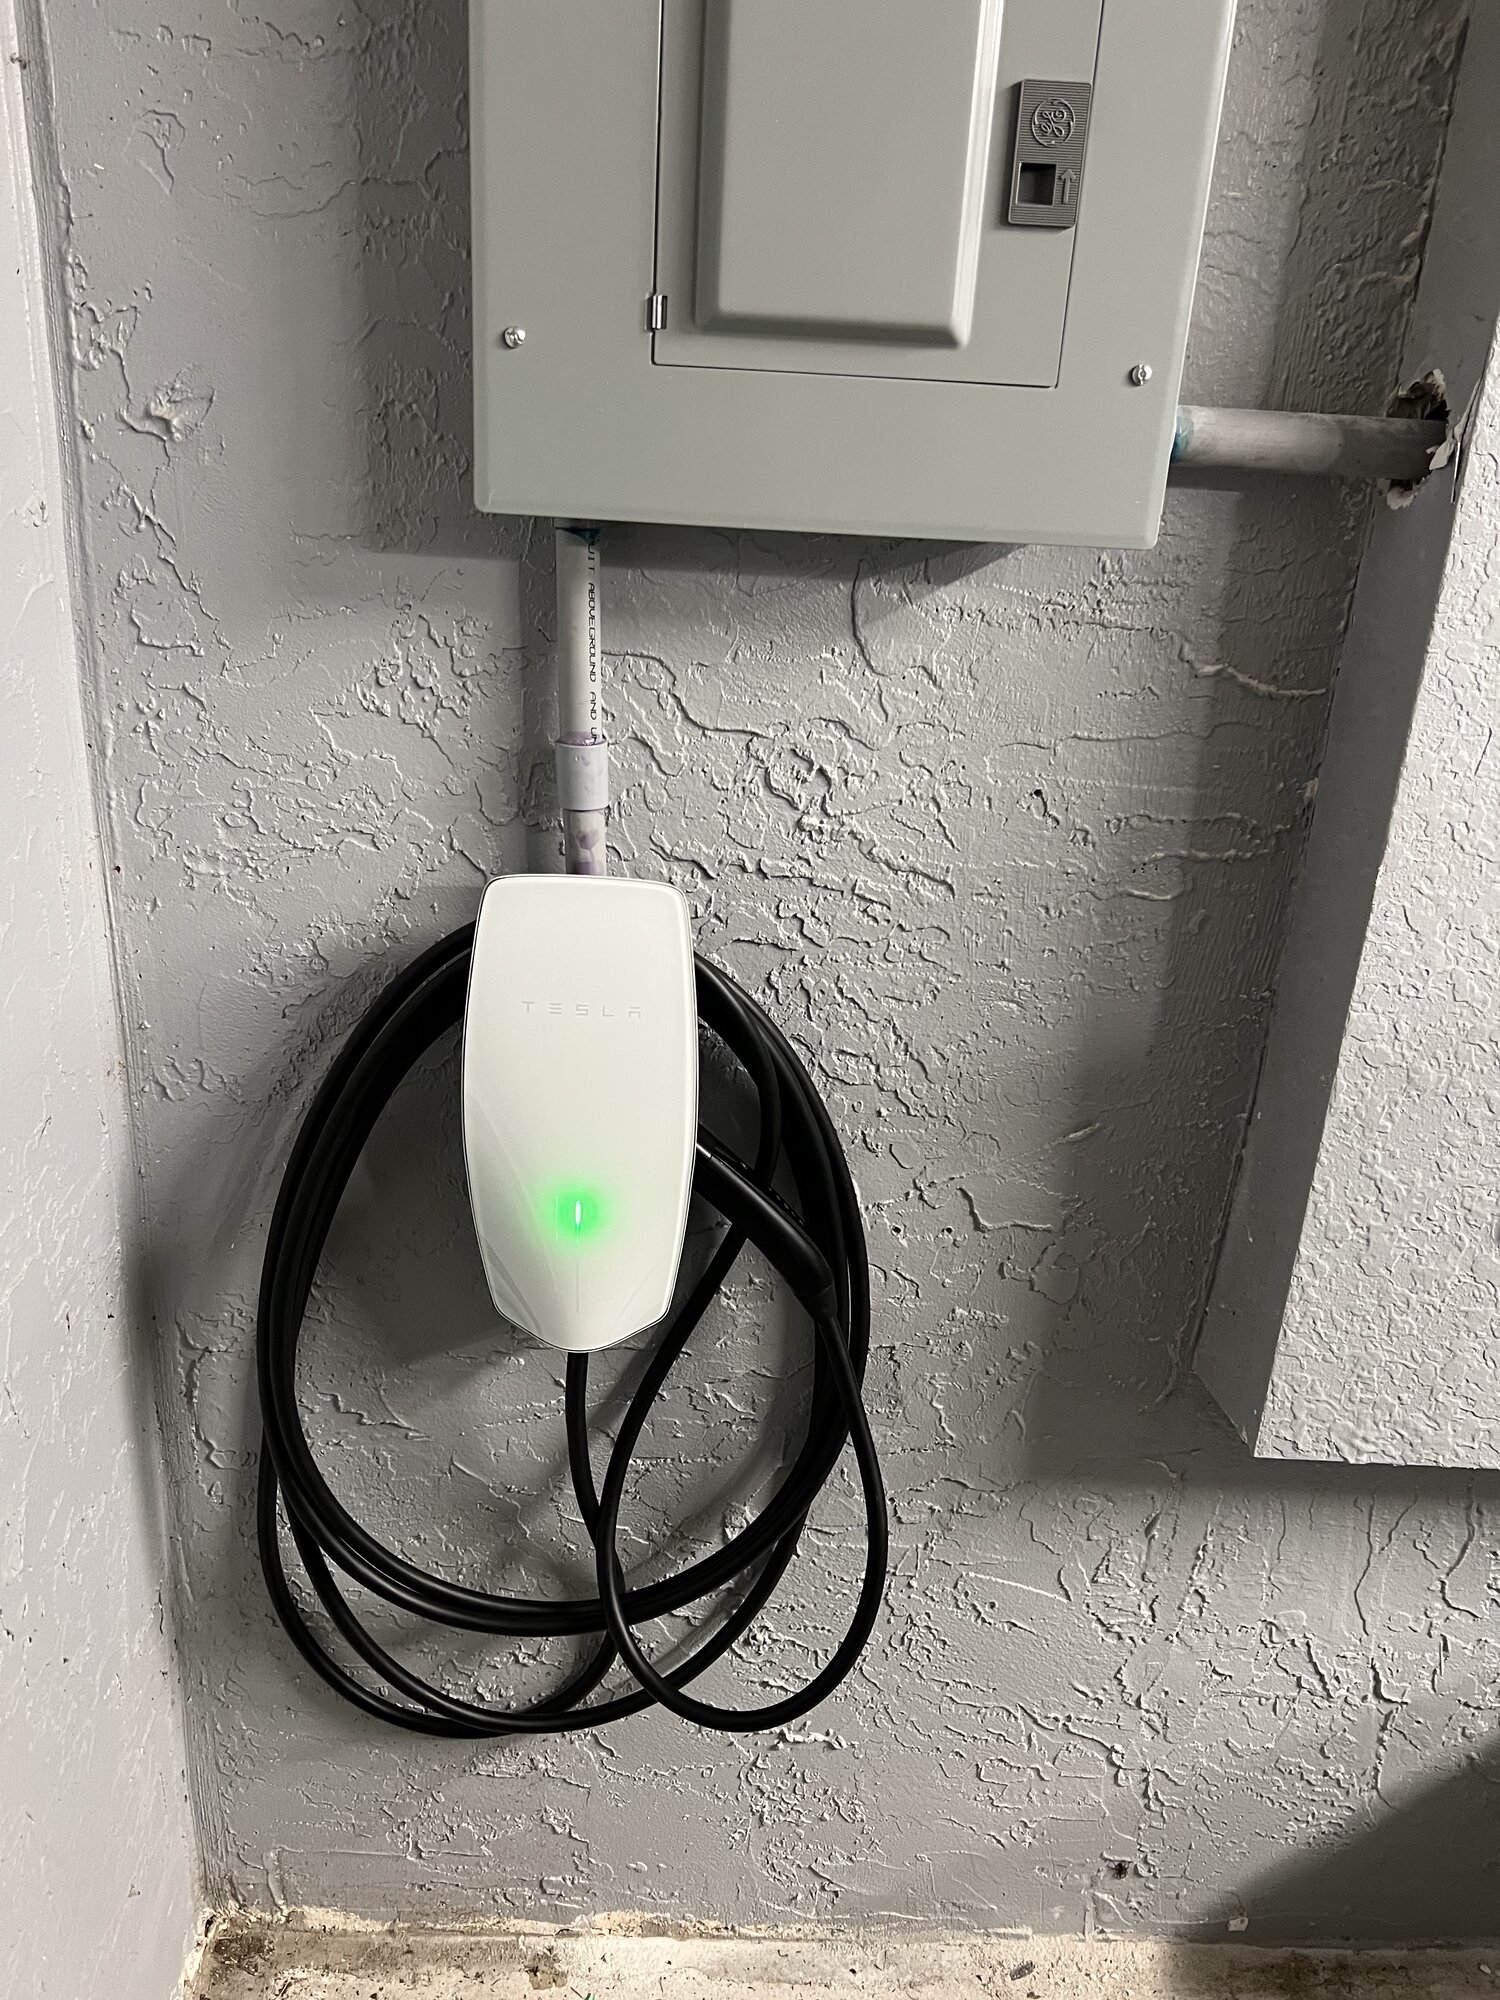 Tesla High Power Wall Connector Charger With 24' Cable 2nd Gen